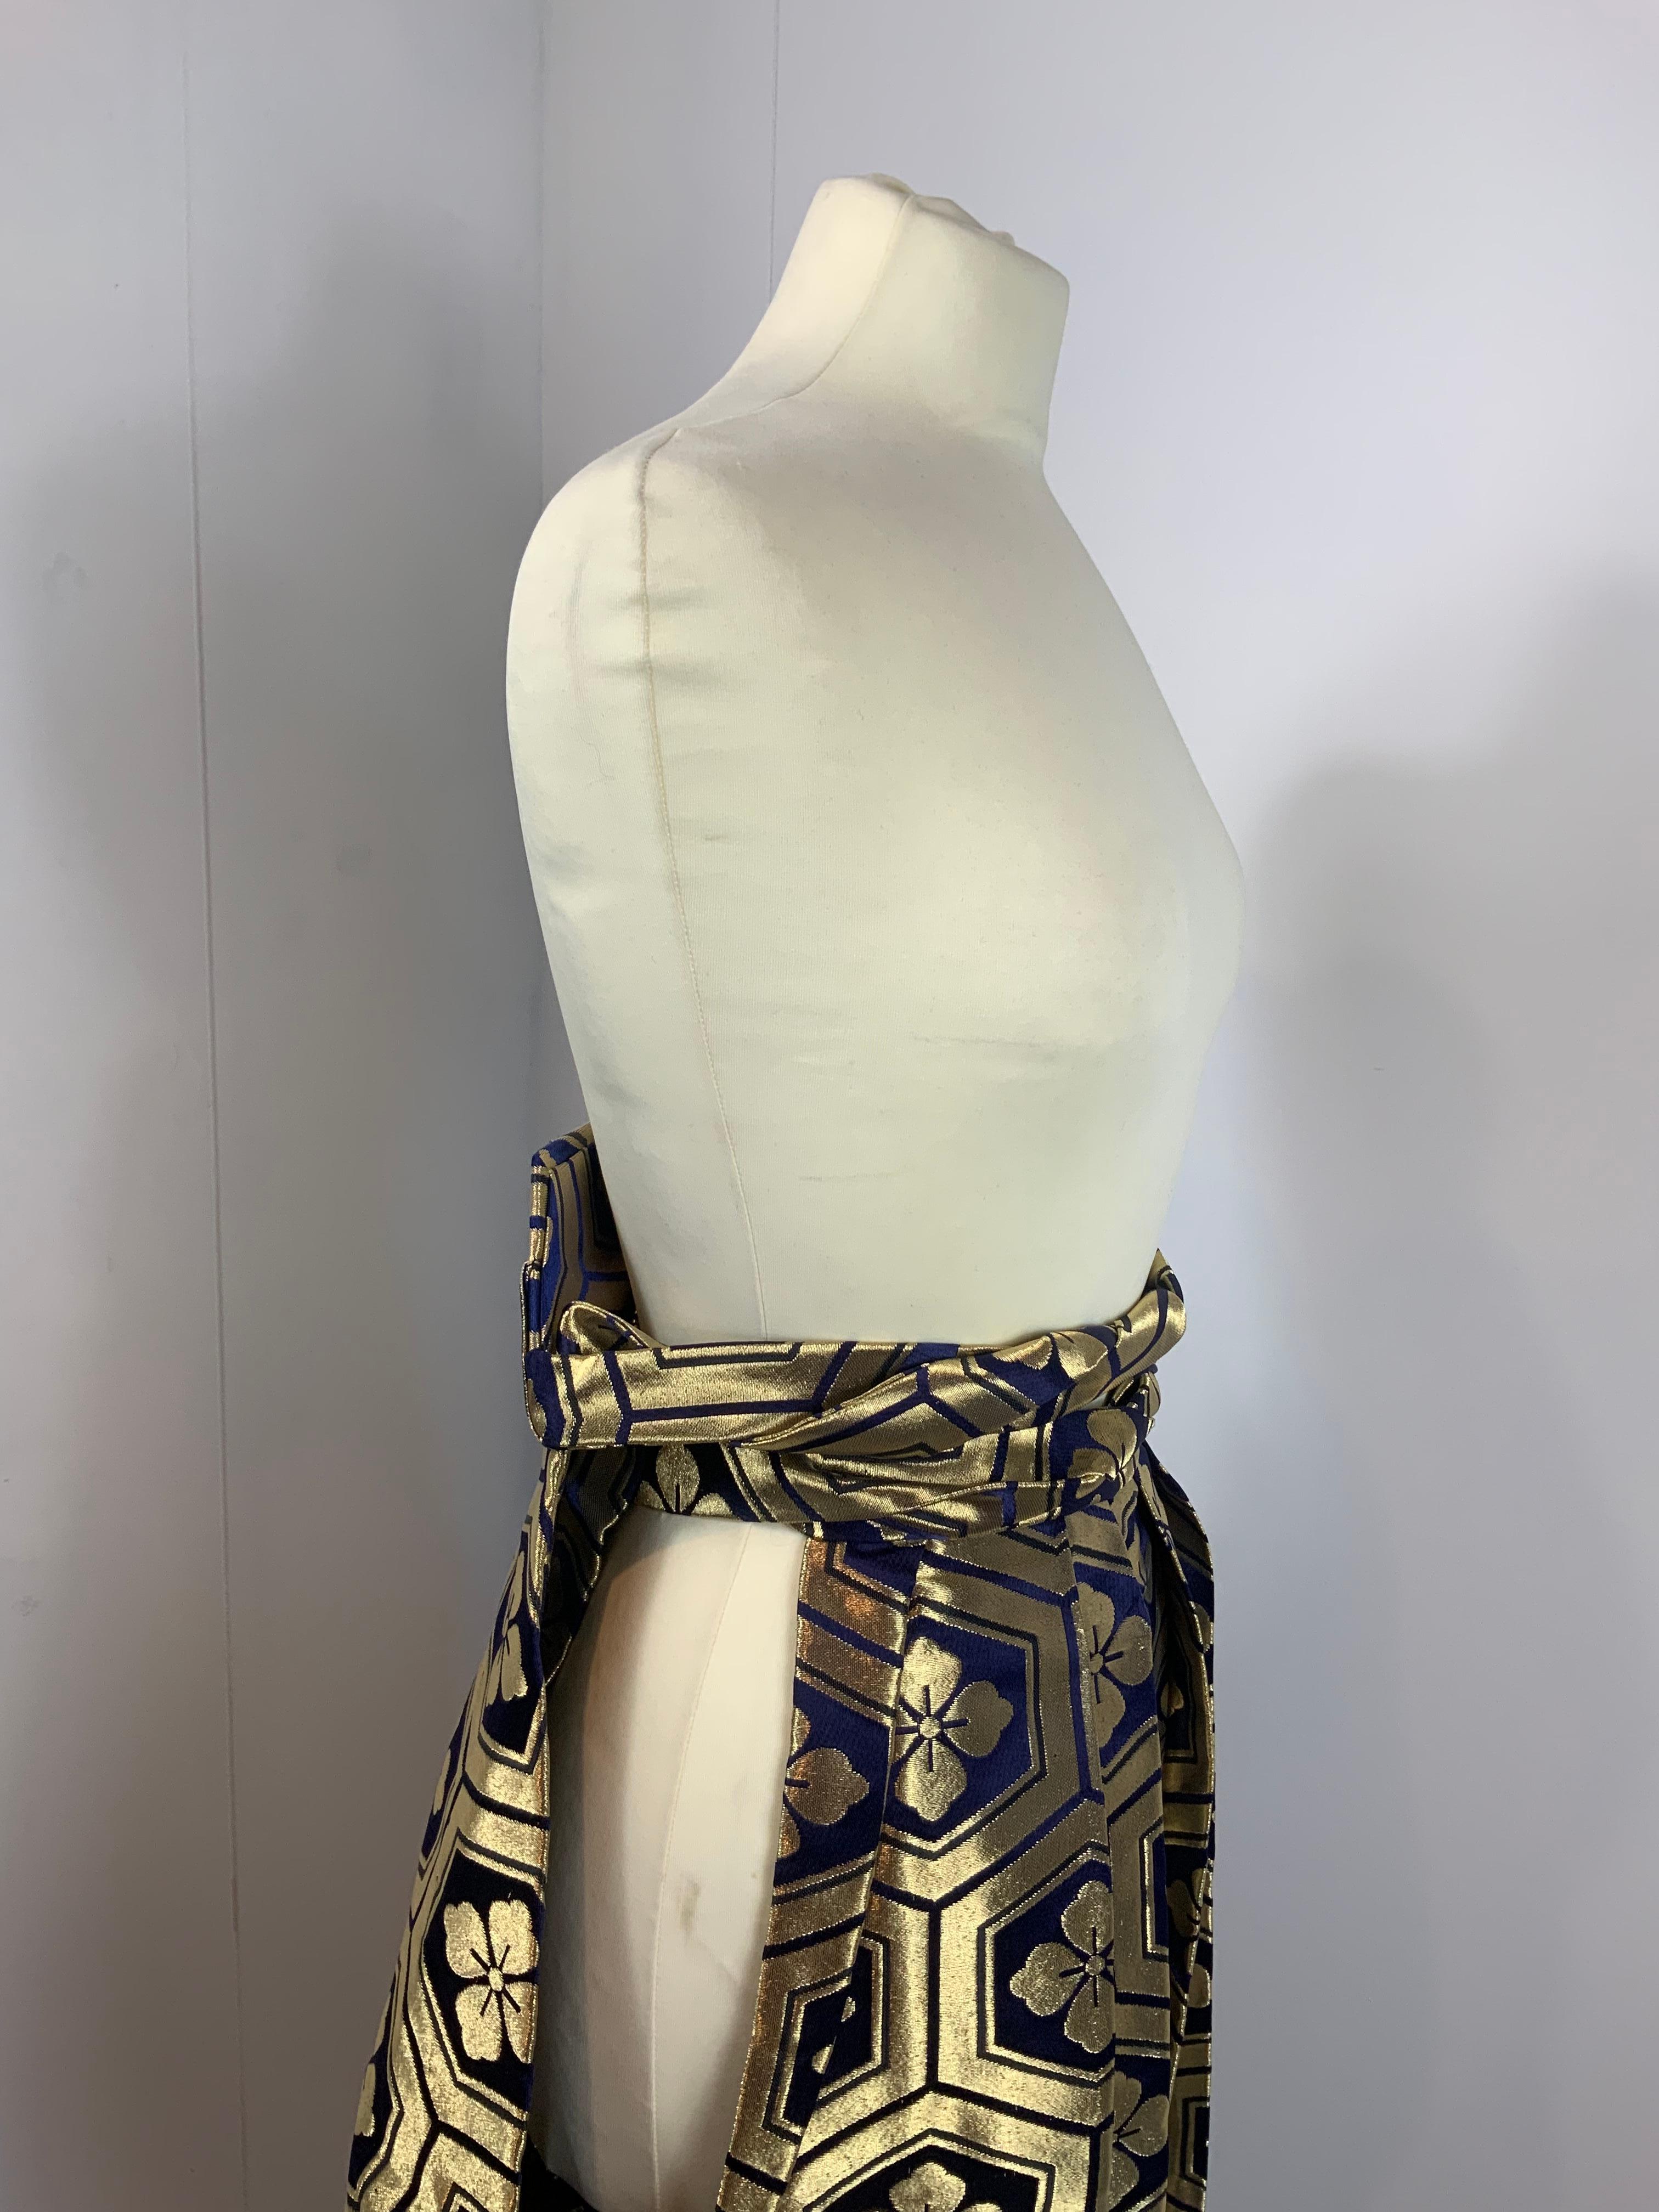 Vintage Japanese Hakama. 
Featuring a very nice blue and gold jacquard pattern. Synthetic fabric.
Traditional Japanese trousers. Bought in Kyoto.
One size. Total length is 83 cm.
Conditions: Good - Previously owned and gently worn, with little signs